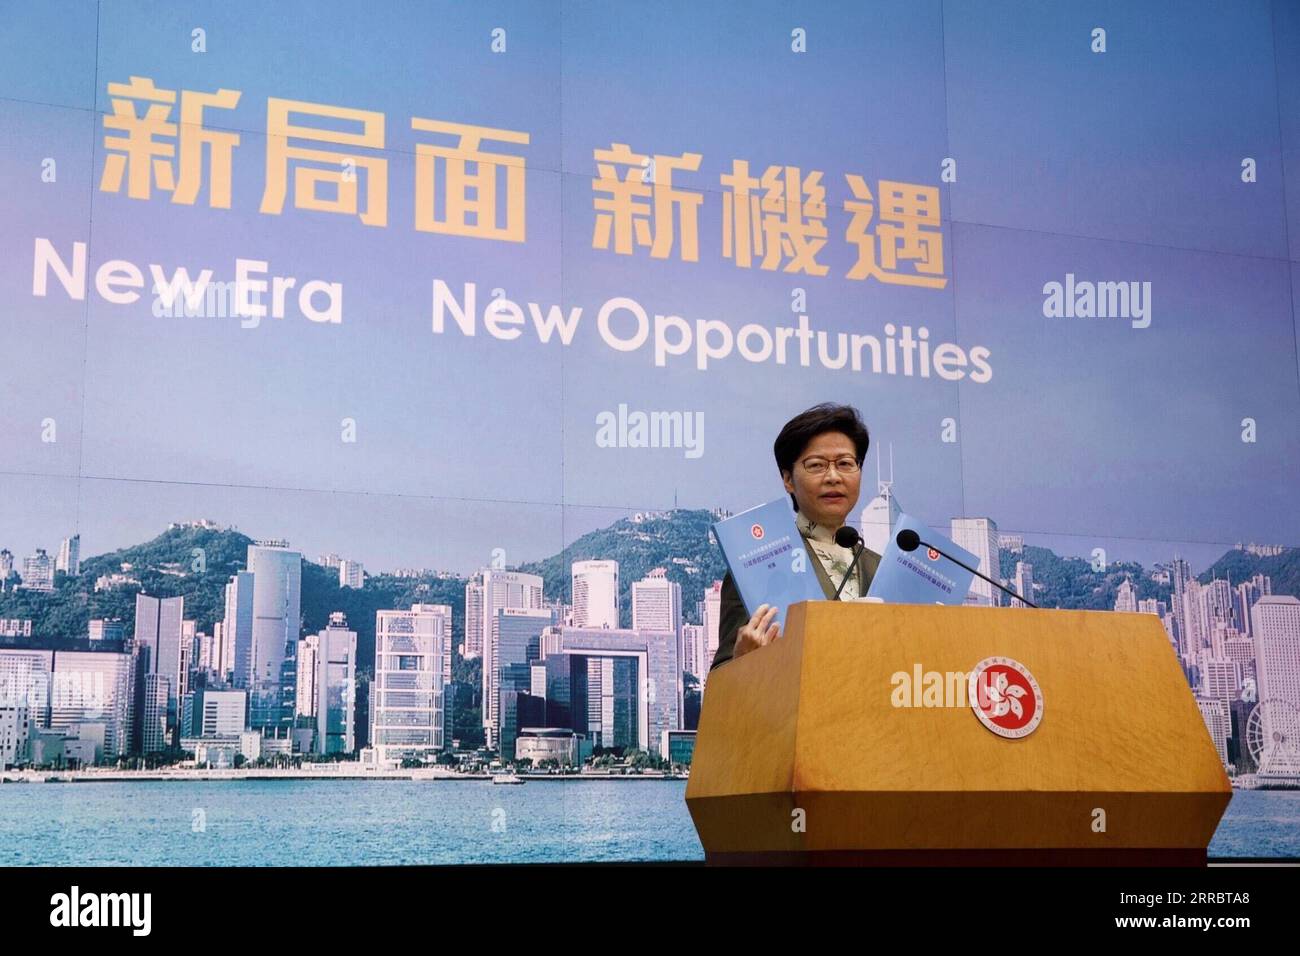 211006 -- HONG KONG, Oct. 6, 2021 -- Chief Executive of China s Hong Kong Special Administrative Region HKSAR Carrie Lam speaks during a press conference in Hong Kong, south China, Oct. 5, 2021. Carrie Lam unveiled Wednesday an array of new measures to reinforce Hong Kong s status as a global financial hub, including improving the listing regime of the stock market and facilitating the cross-boundary flow of renminbi. The 2021 policy address, the fifth of its kind since Lam took office in 2017, focuses on bolstering Hong Kong s economy, tackling an entrenched housing shortage and prompting Hon Stock Photo